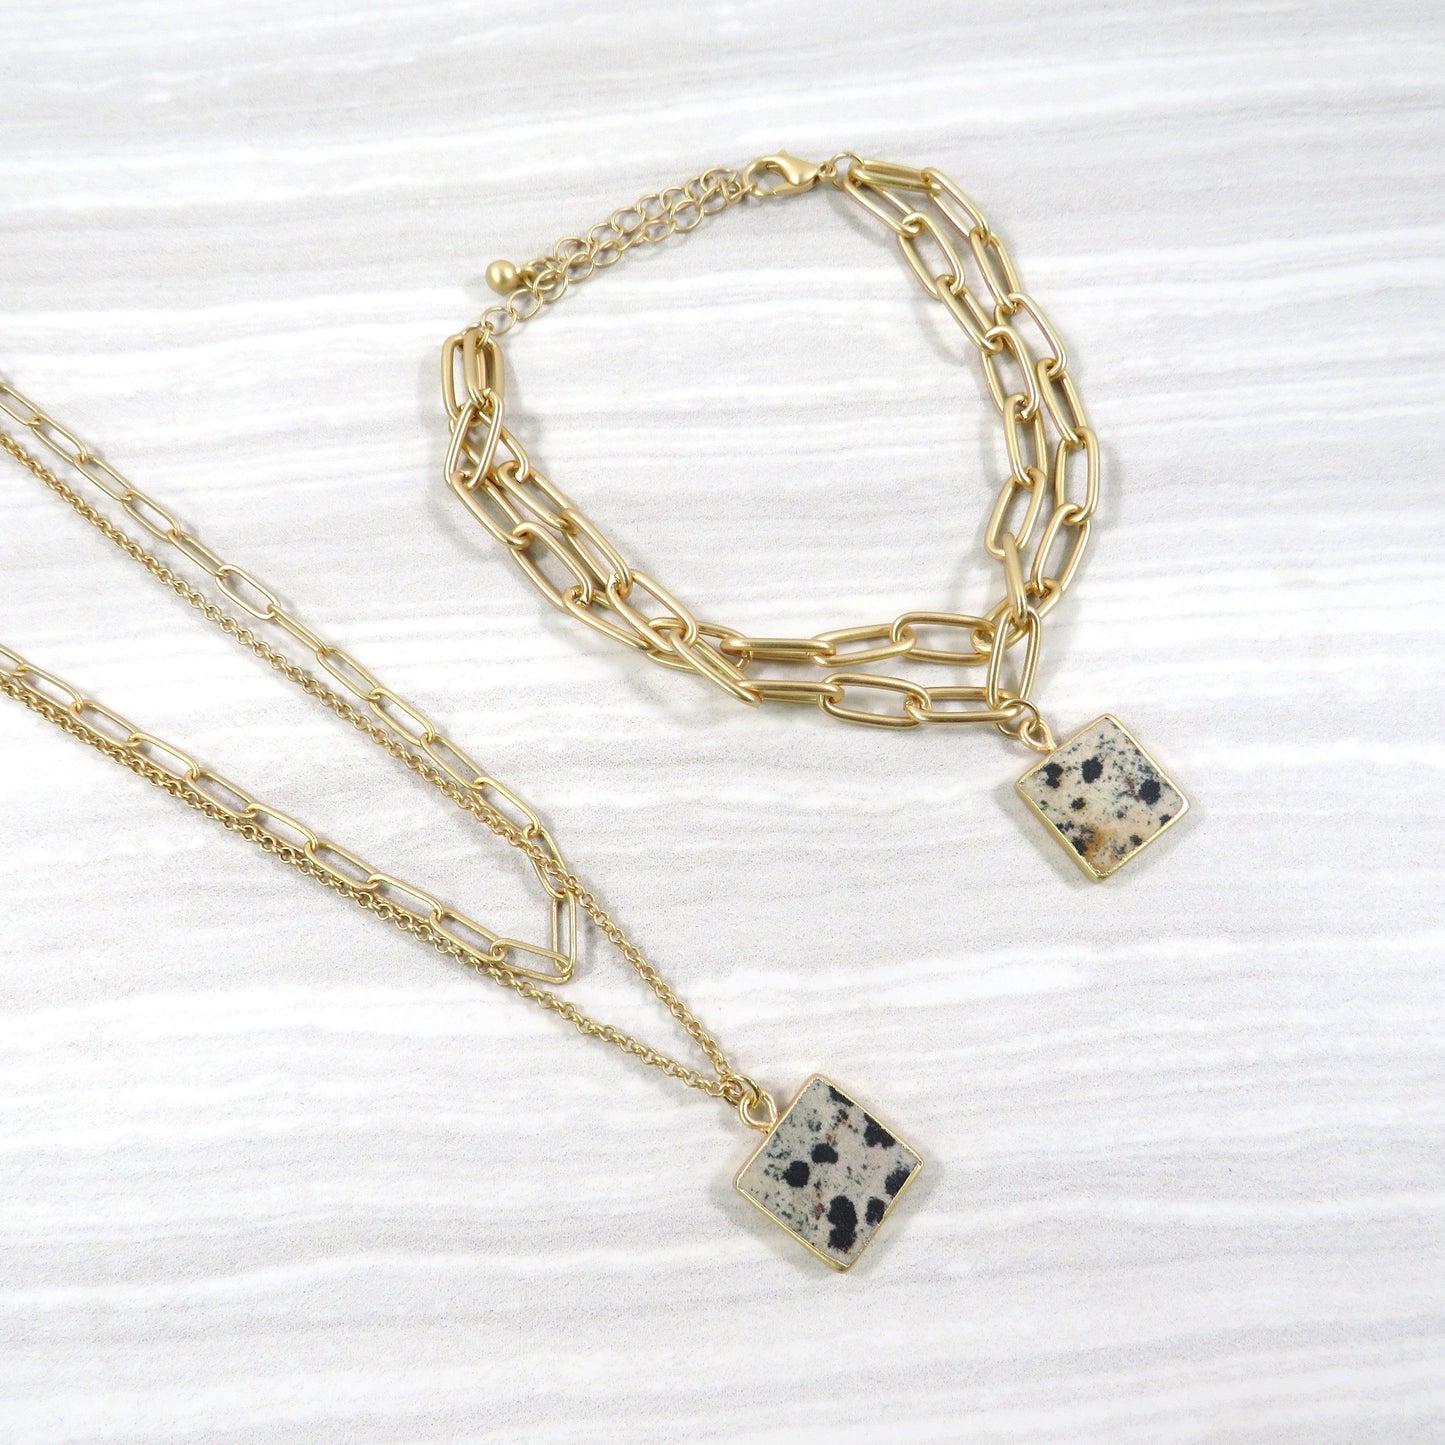 double layer gold chain necklace and bracelet set with a square Dalmatian jasper stone on a gray and white tile background